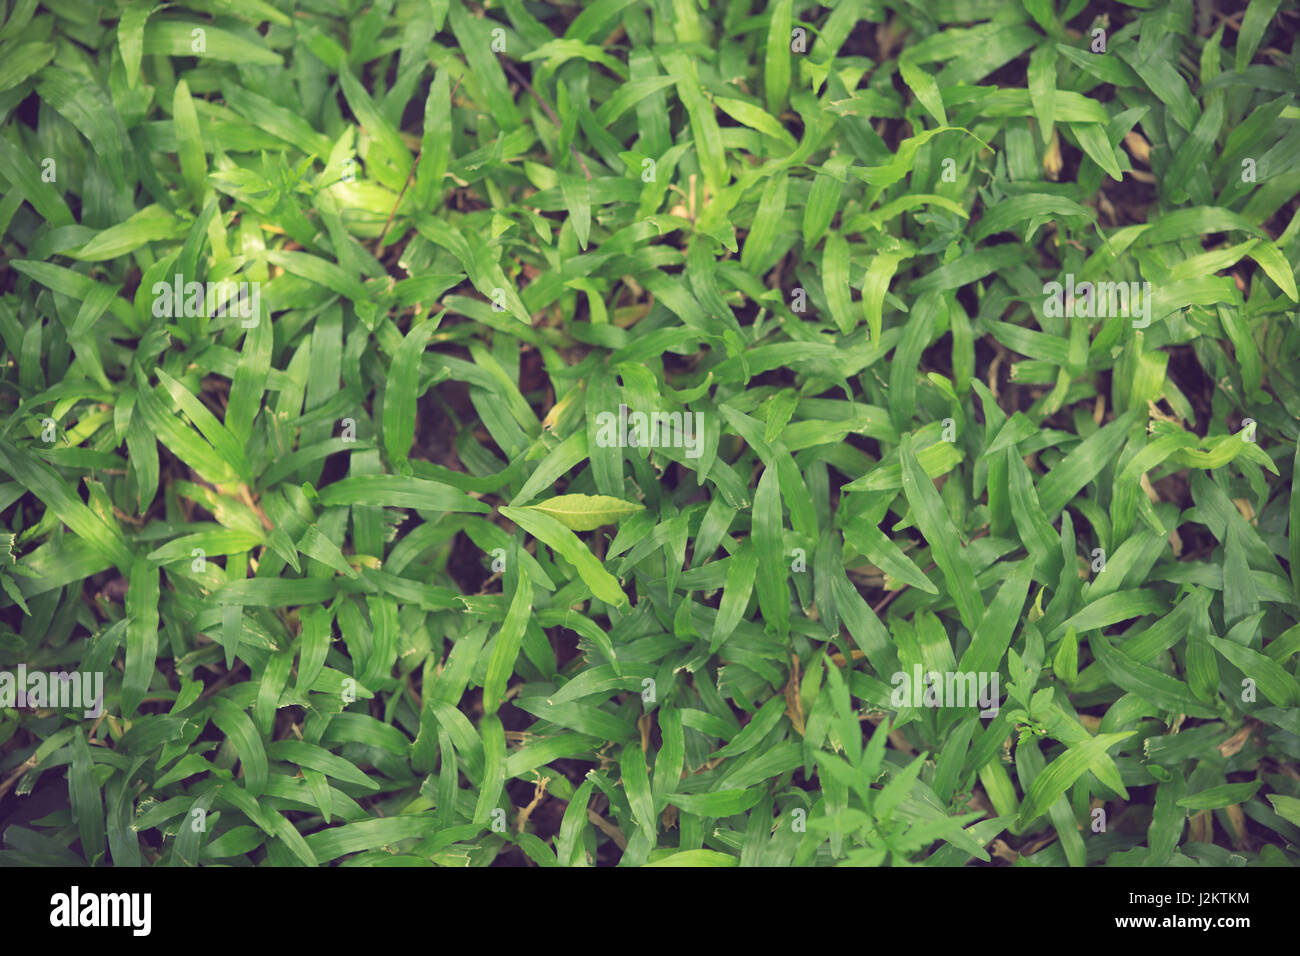 Green grass seamless texture. Seamless in only horizontal dimension vintage color Stock Photo